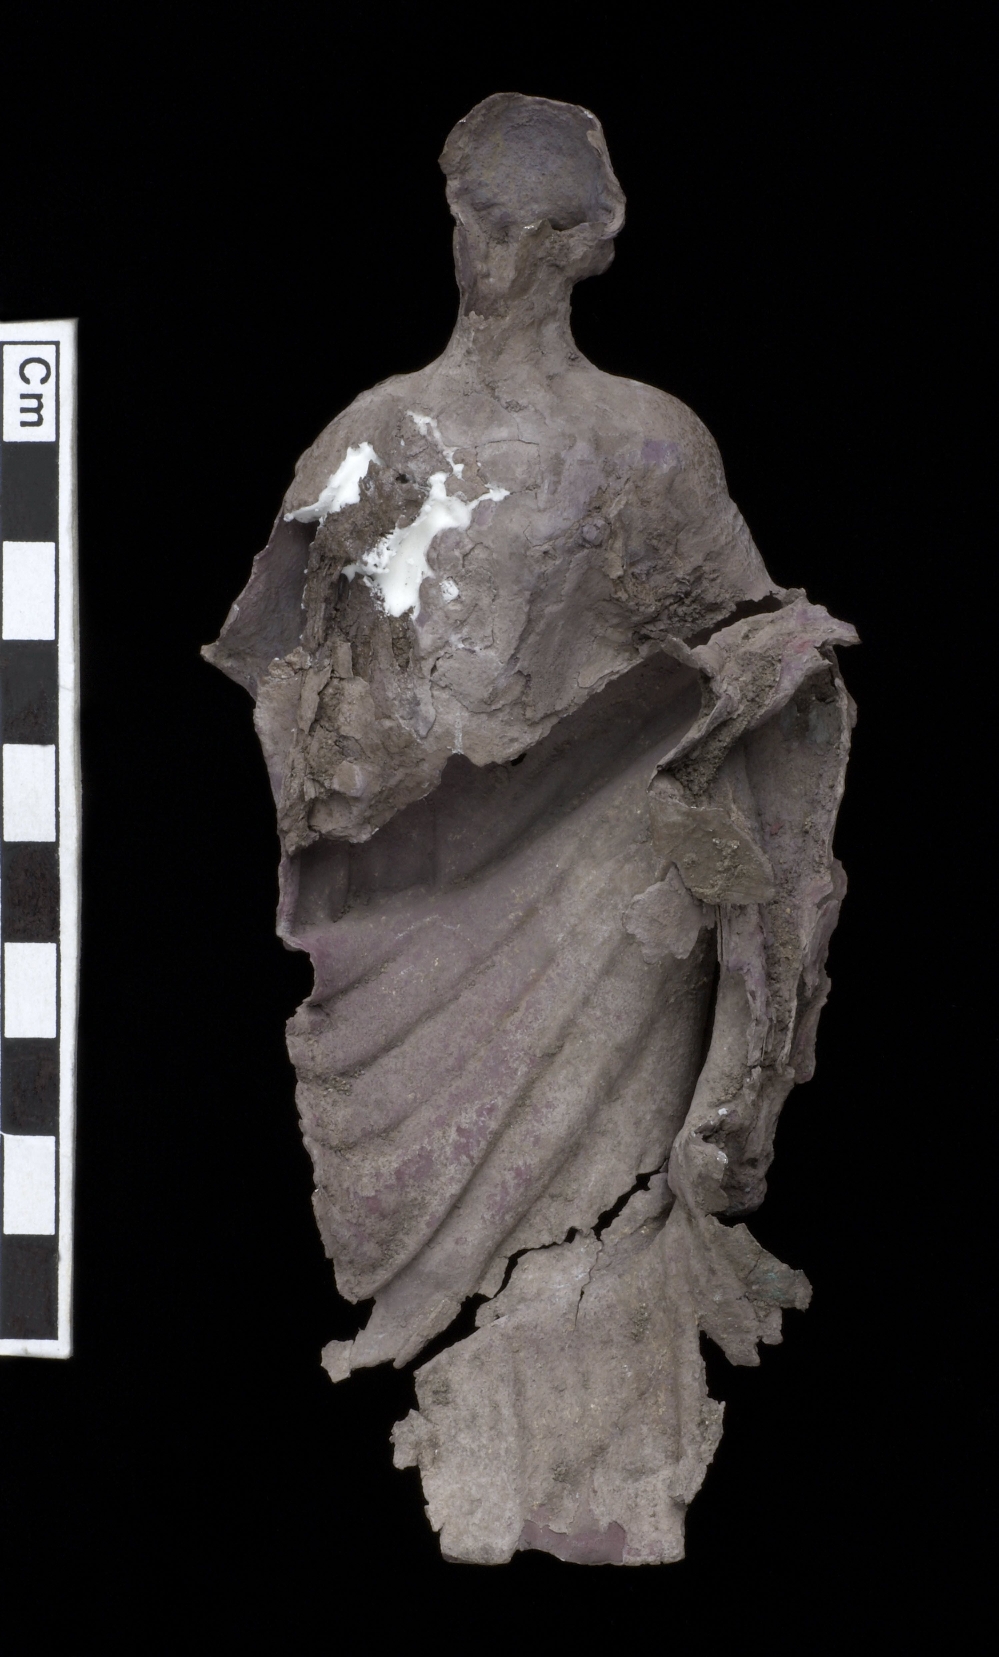 Statuette of Senuna that has eroded away